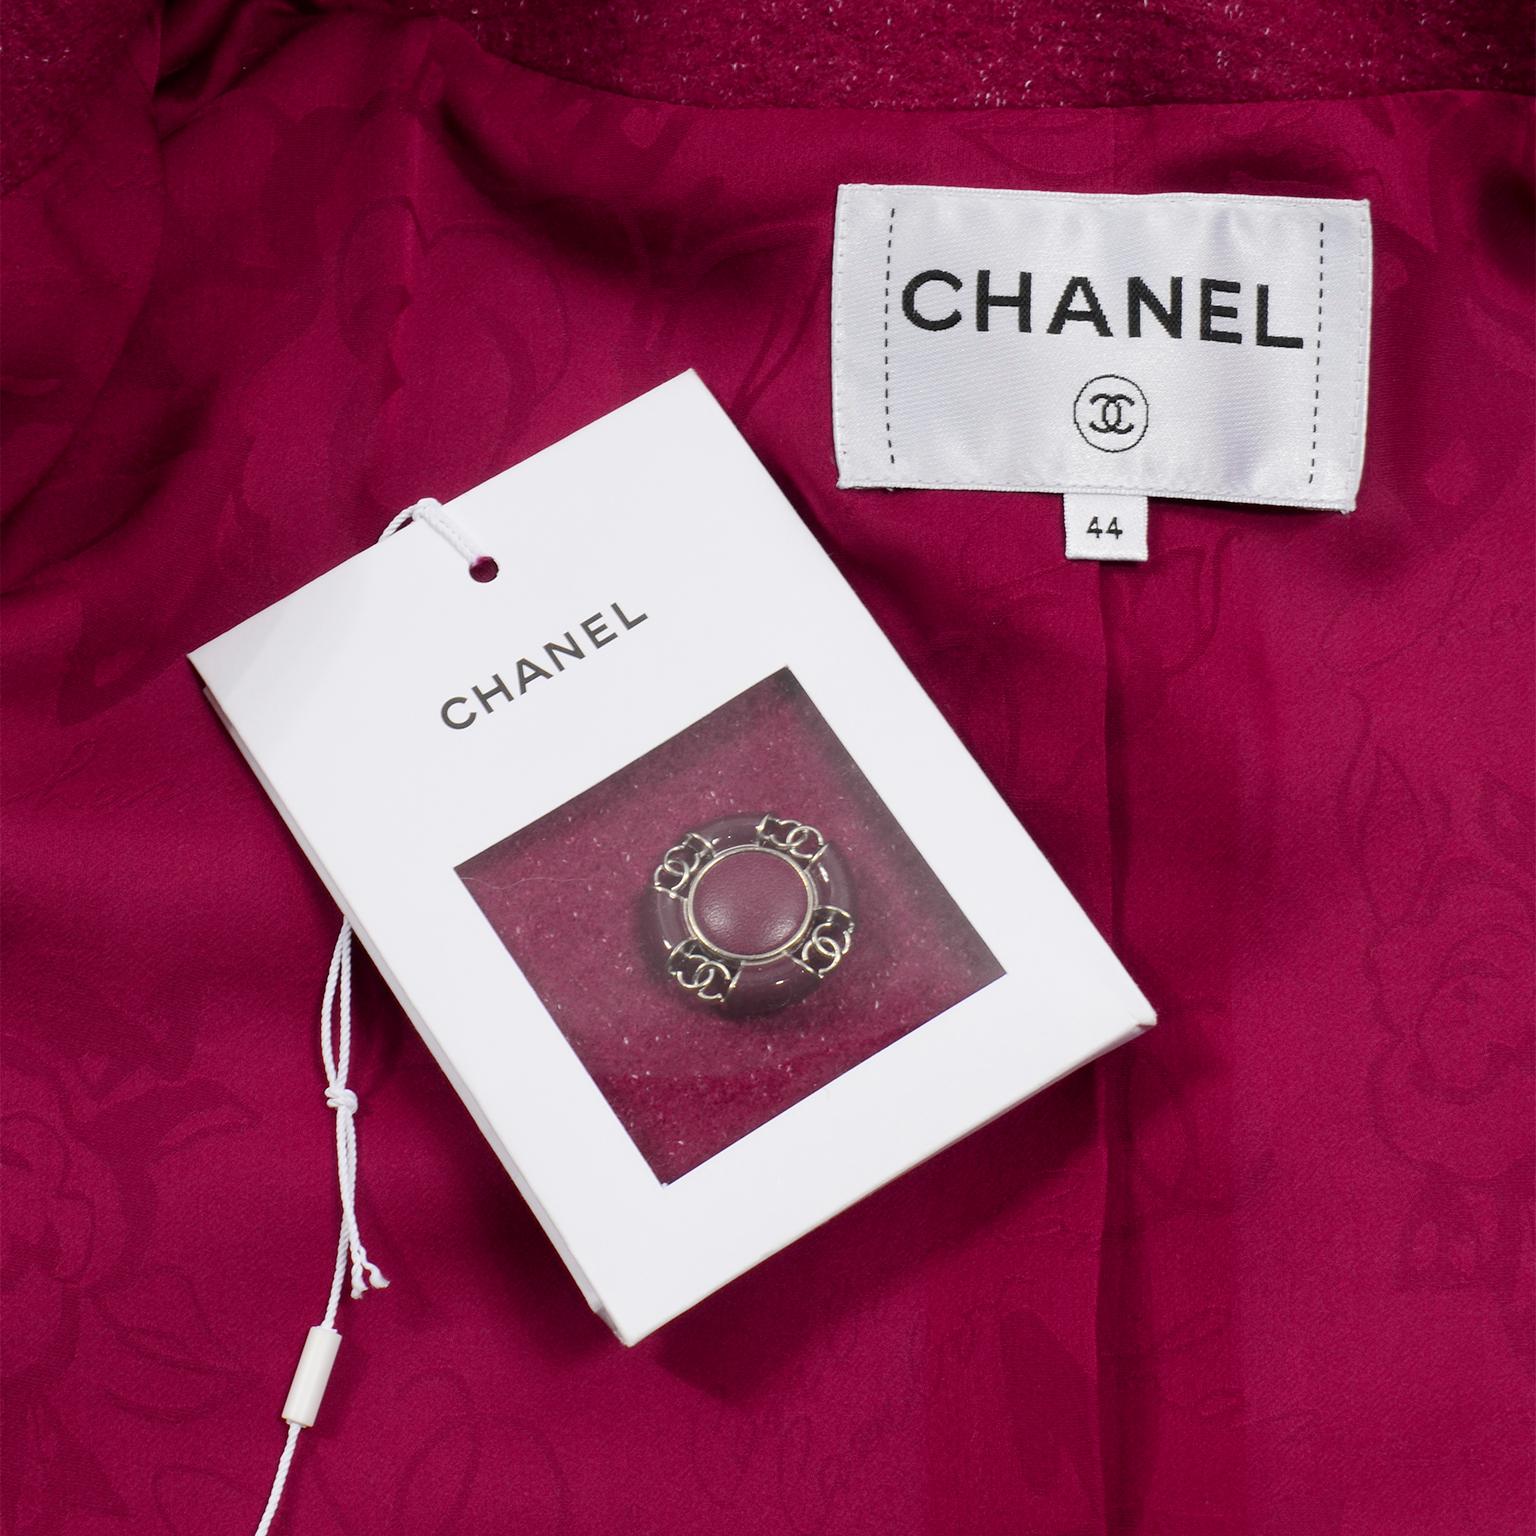 Chanel New With Tags 2018 Raspberry Pink Wool Blend Jacket Deadstock 8